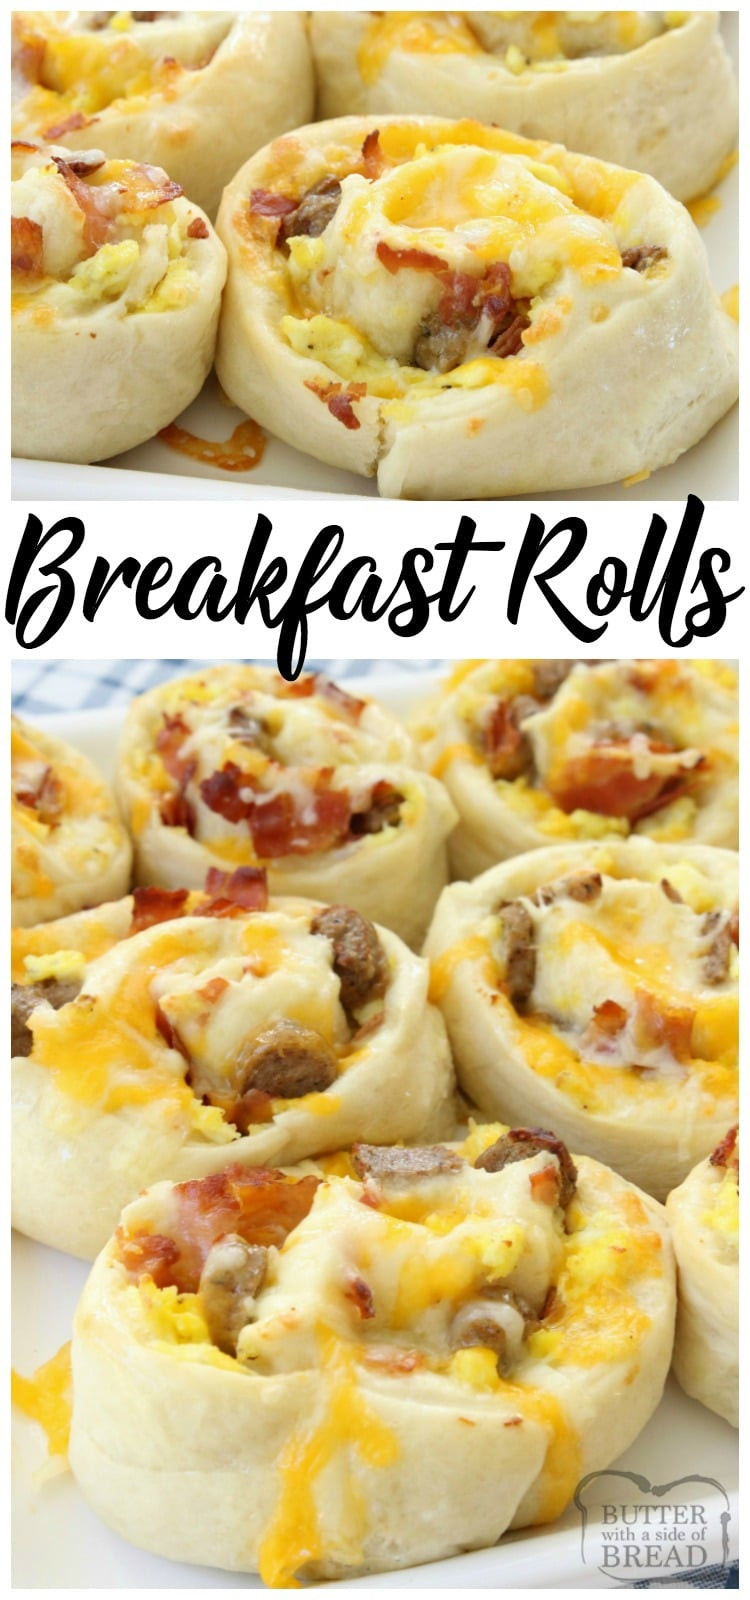 Top 20 Breakfast Rolls Recipe - Best Recipes Ideas and Collections